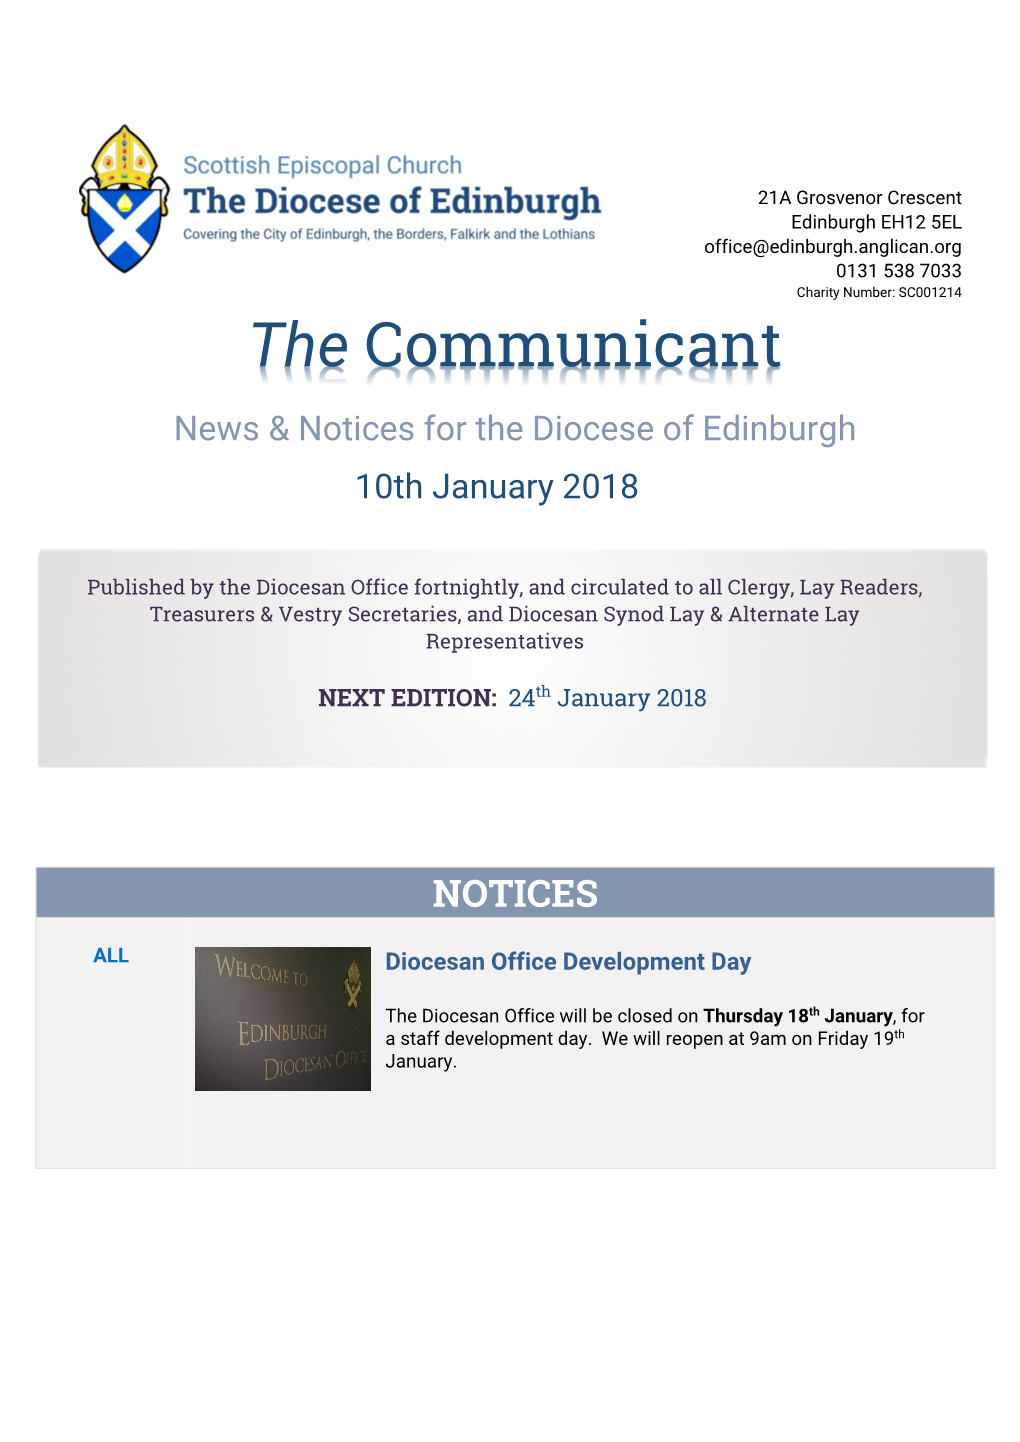 The Communicant News & Notices for the Diocese of Edinburgh 10Th January 2018